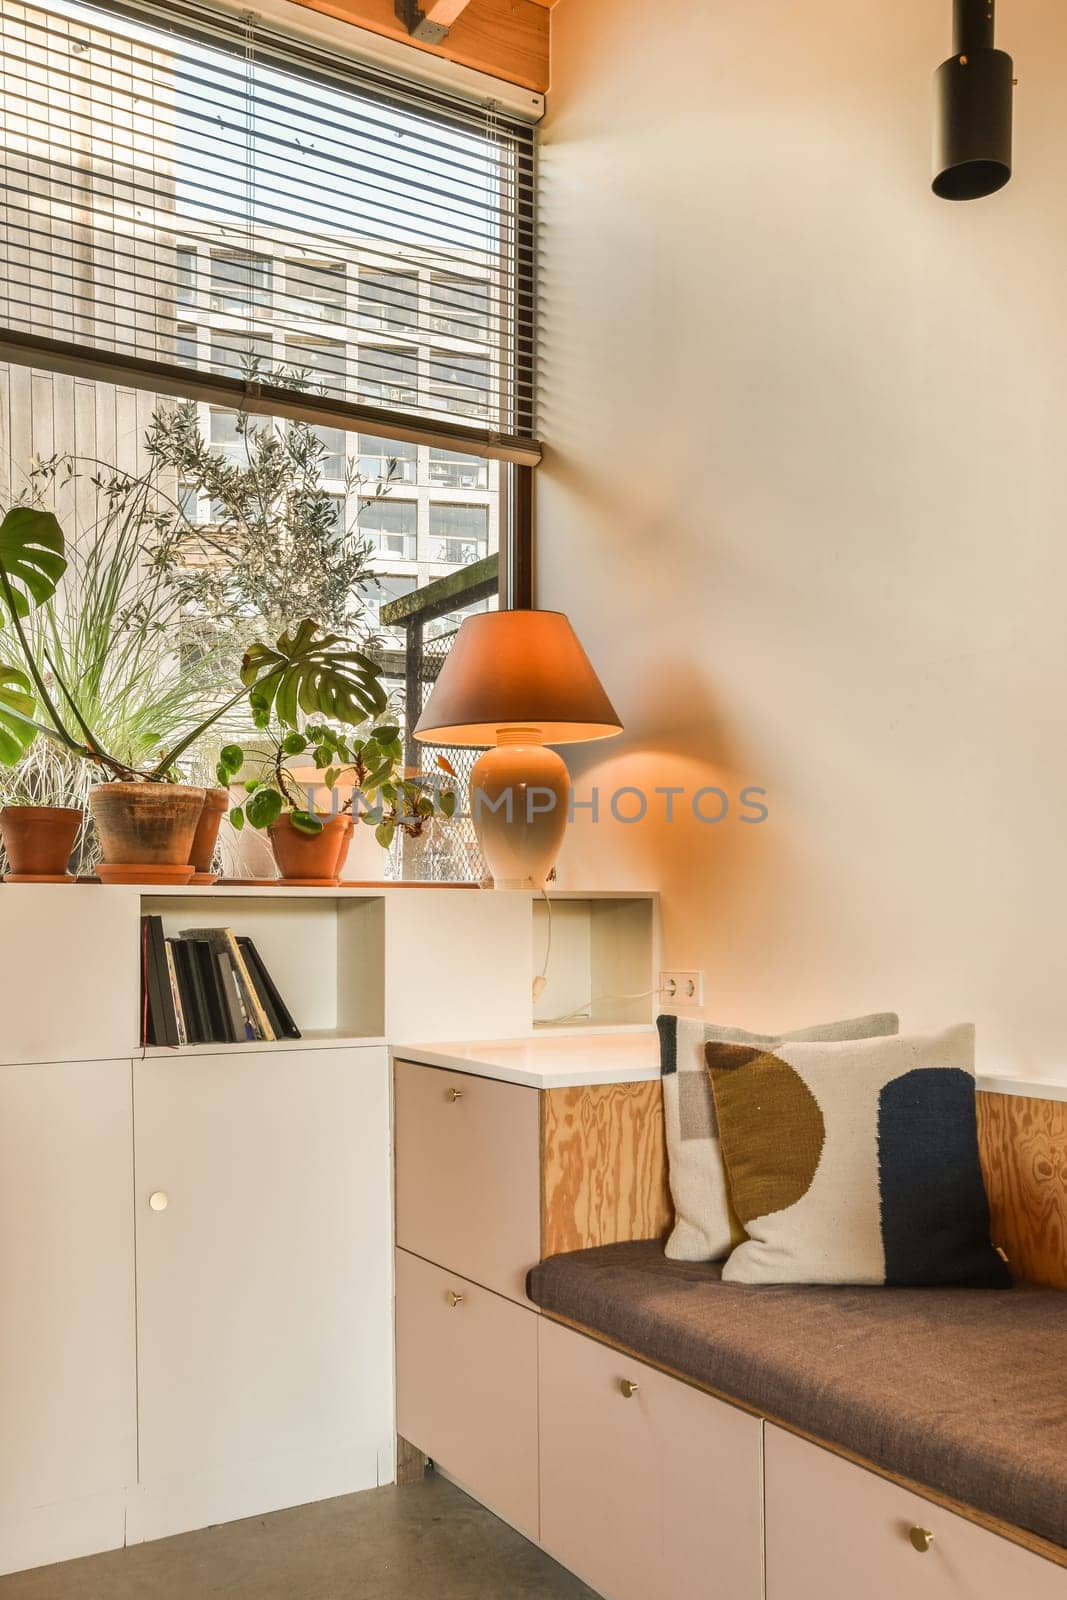 a living room with some plants in the window sis and an office chair on the floor next to it